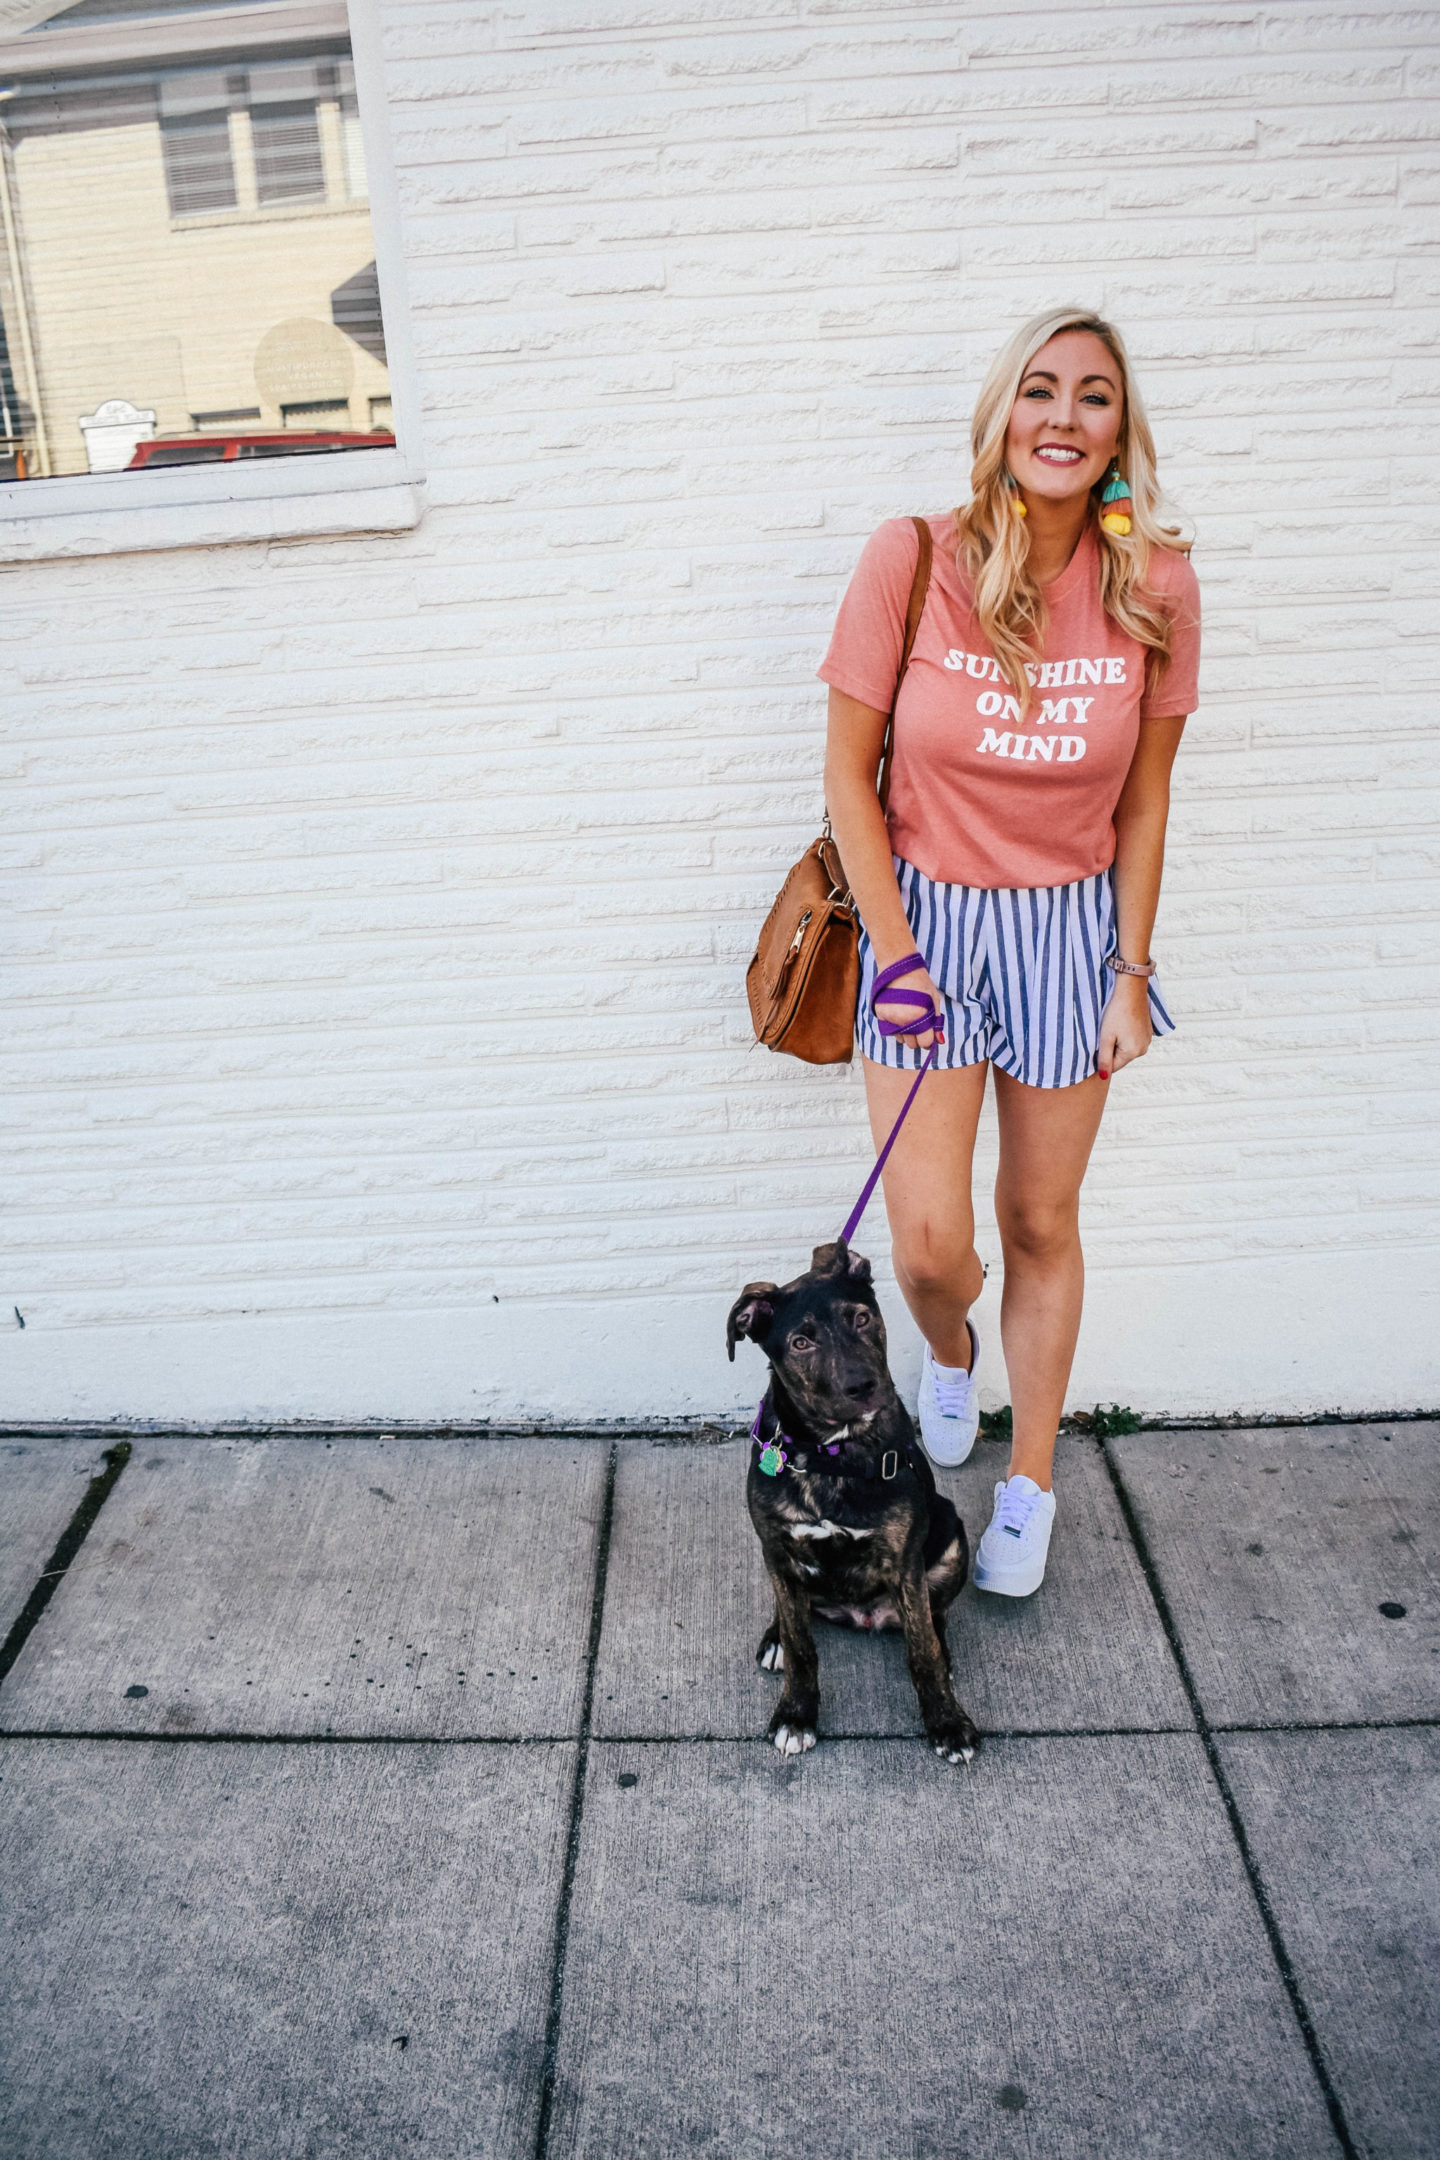 Styling a graphic tee for Spring!